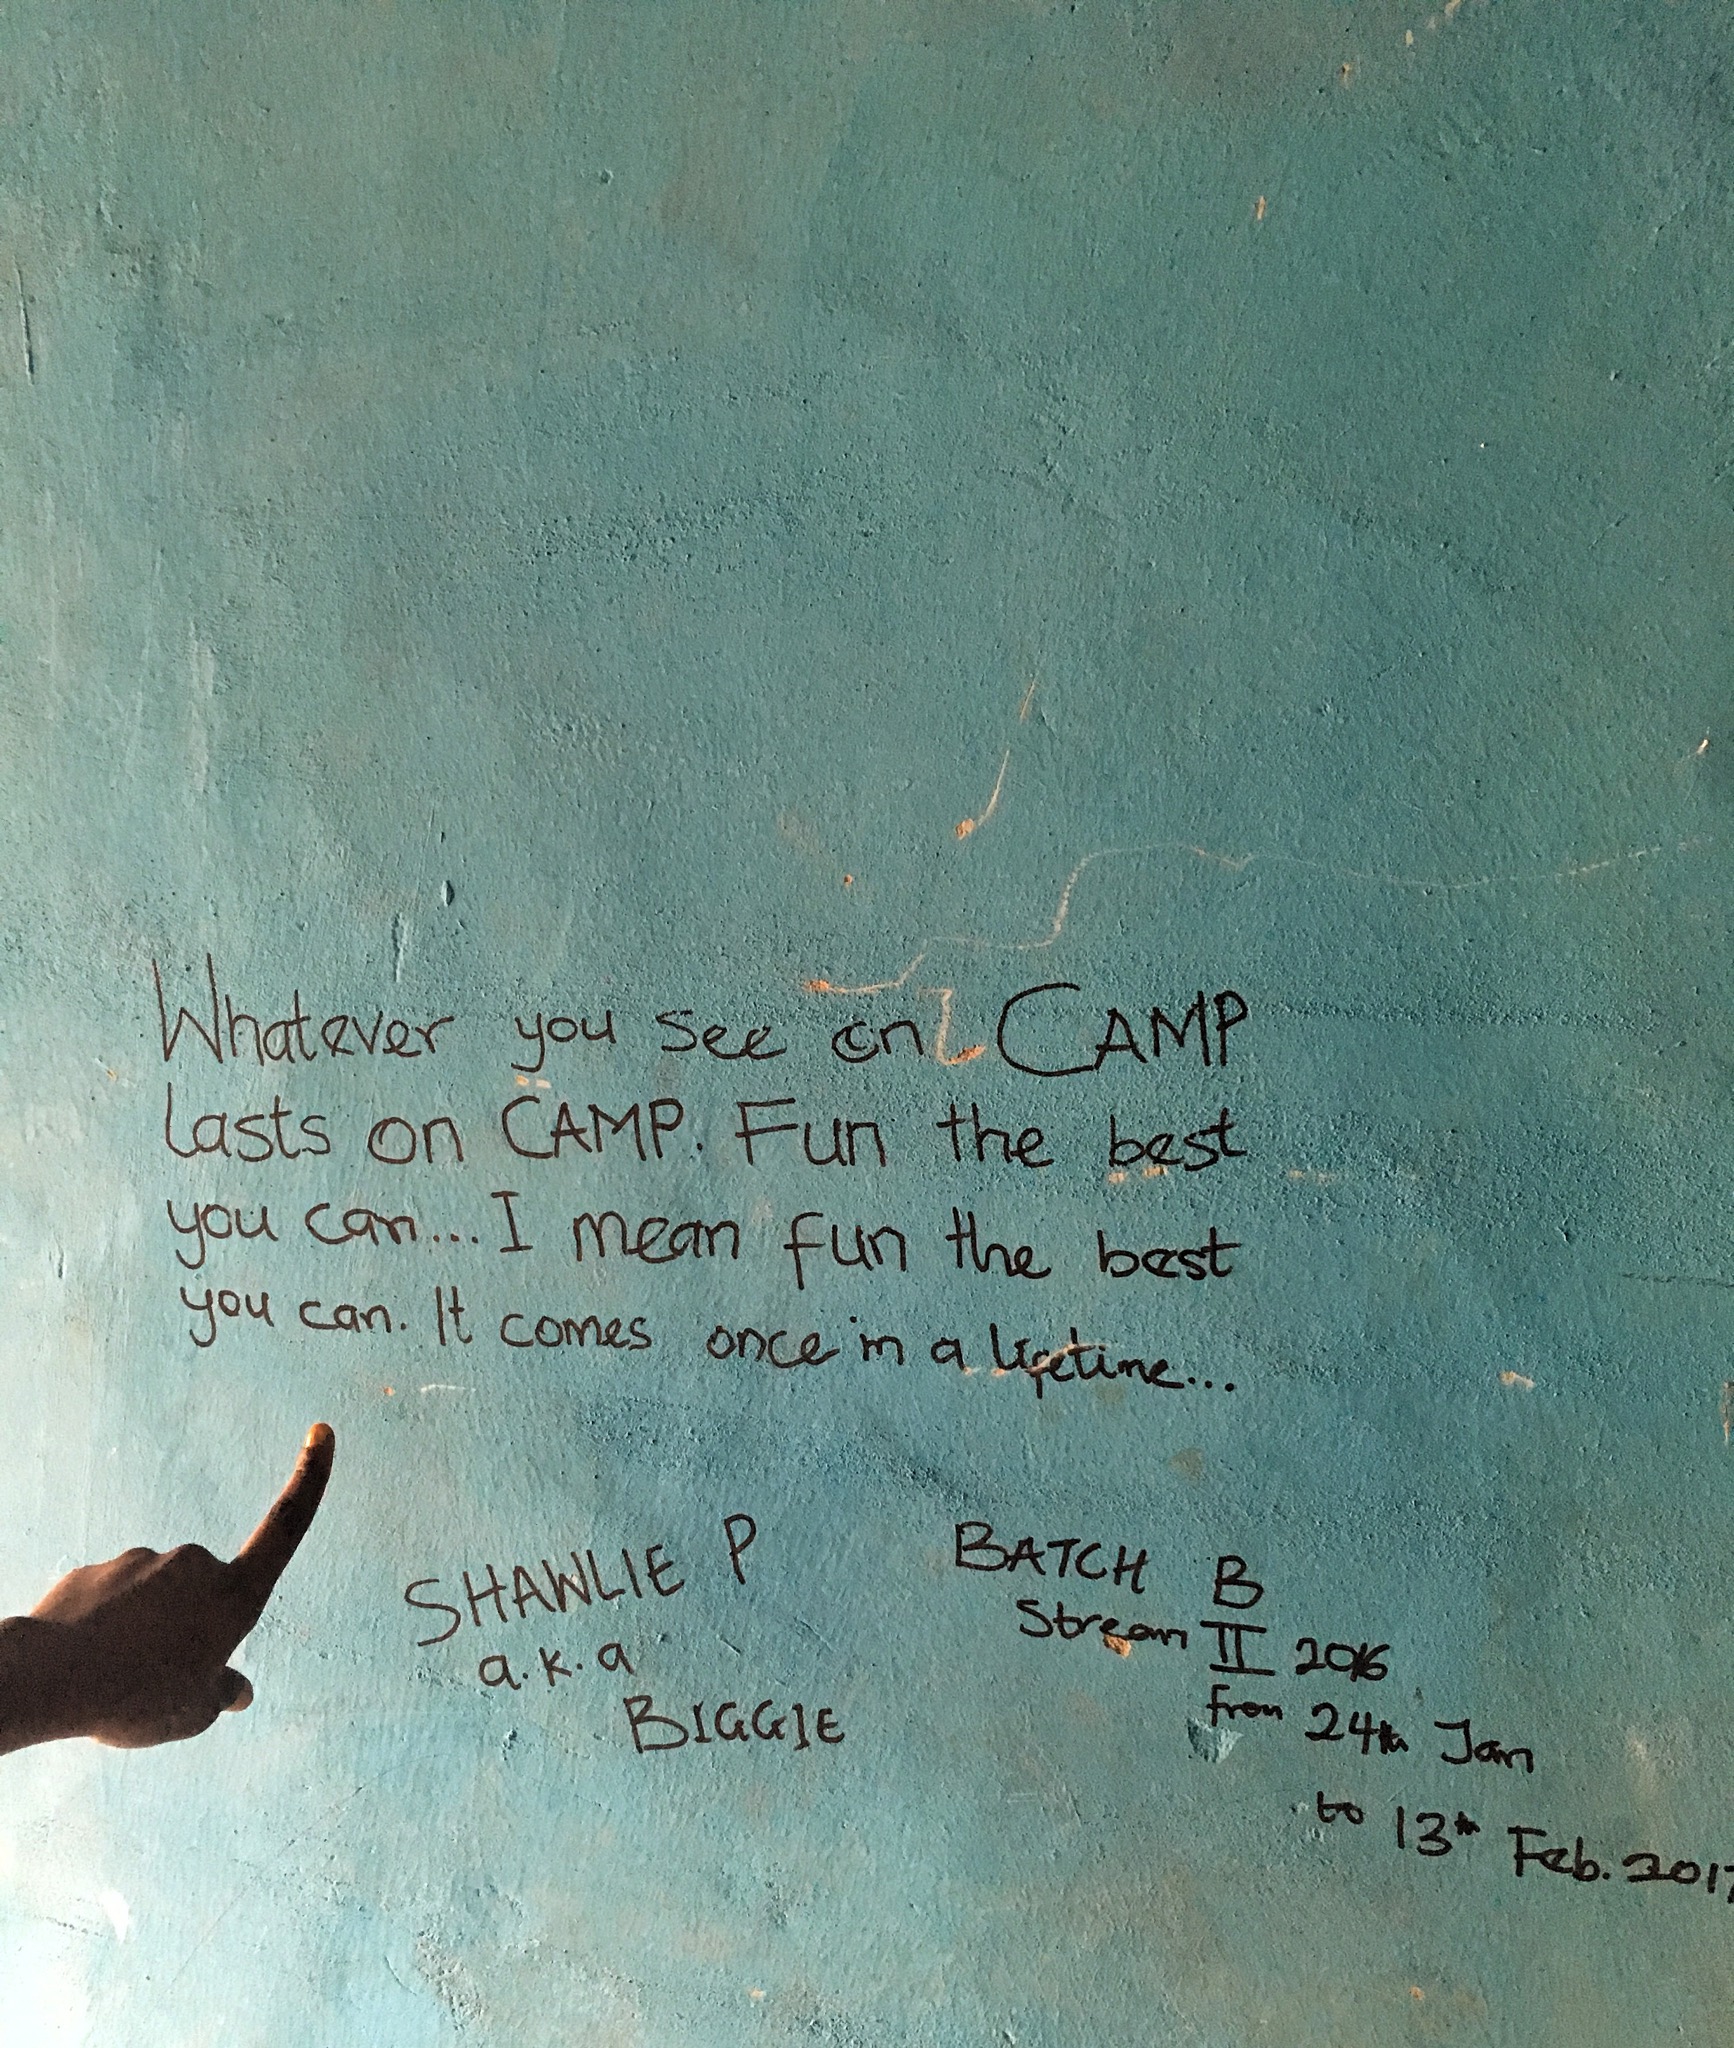 my nysc camp experience in kogi state - hand written note on the wall